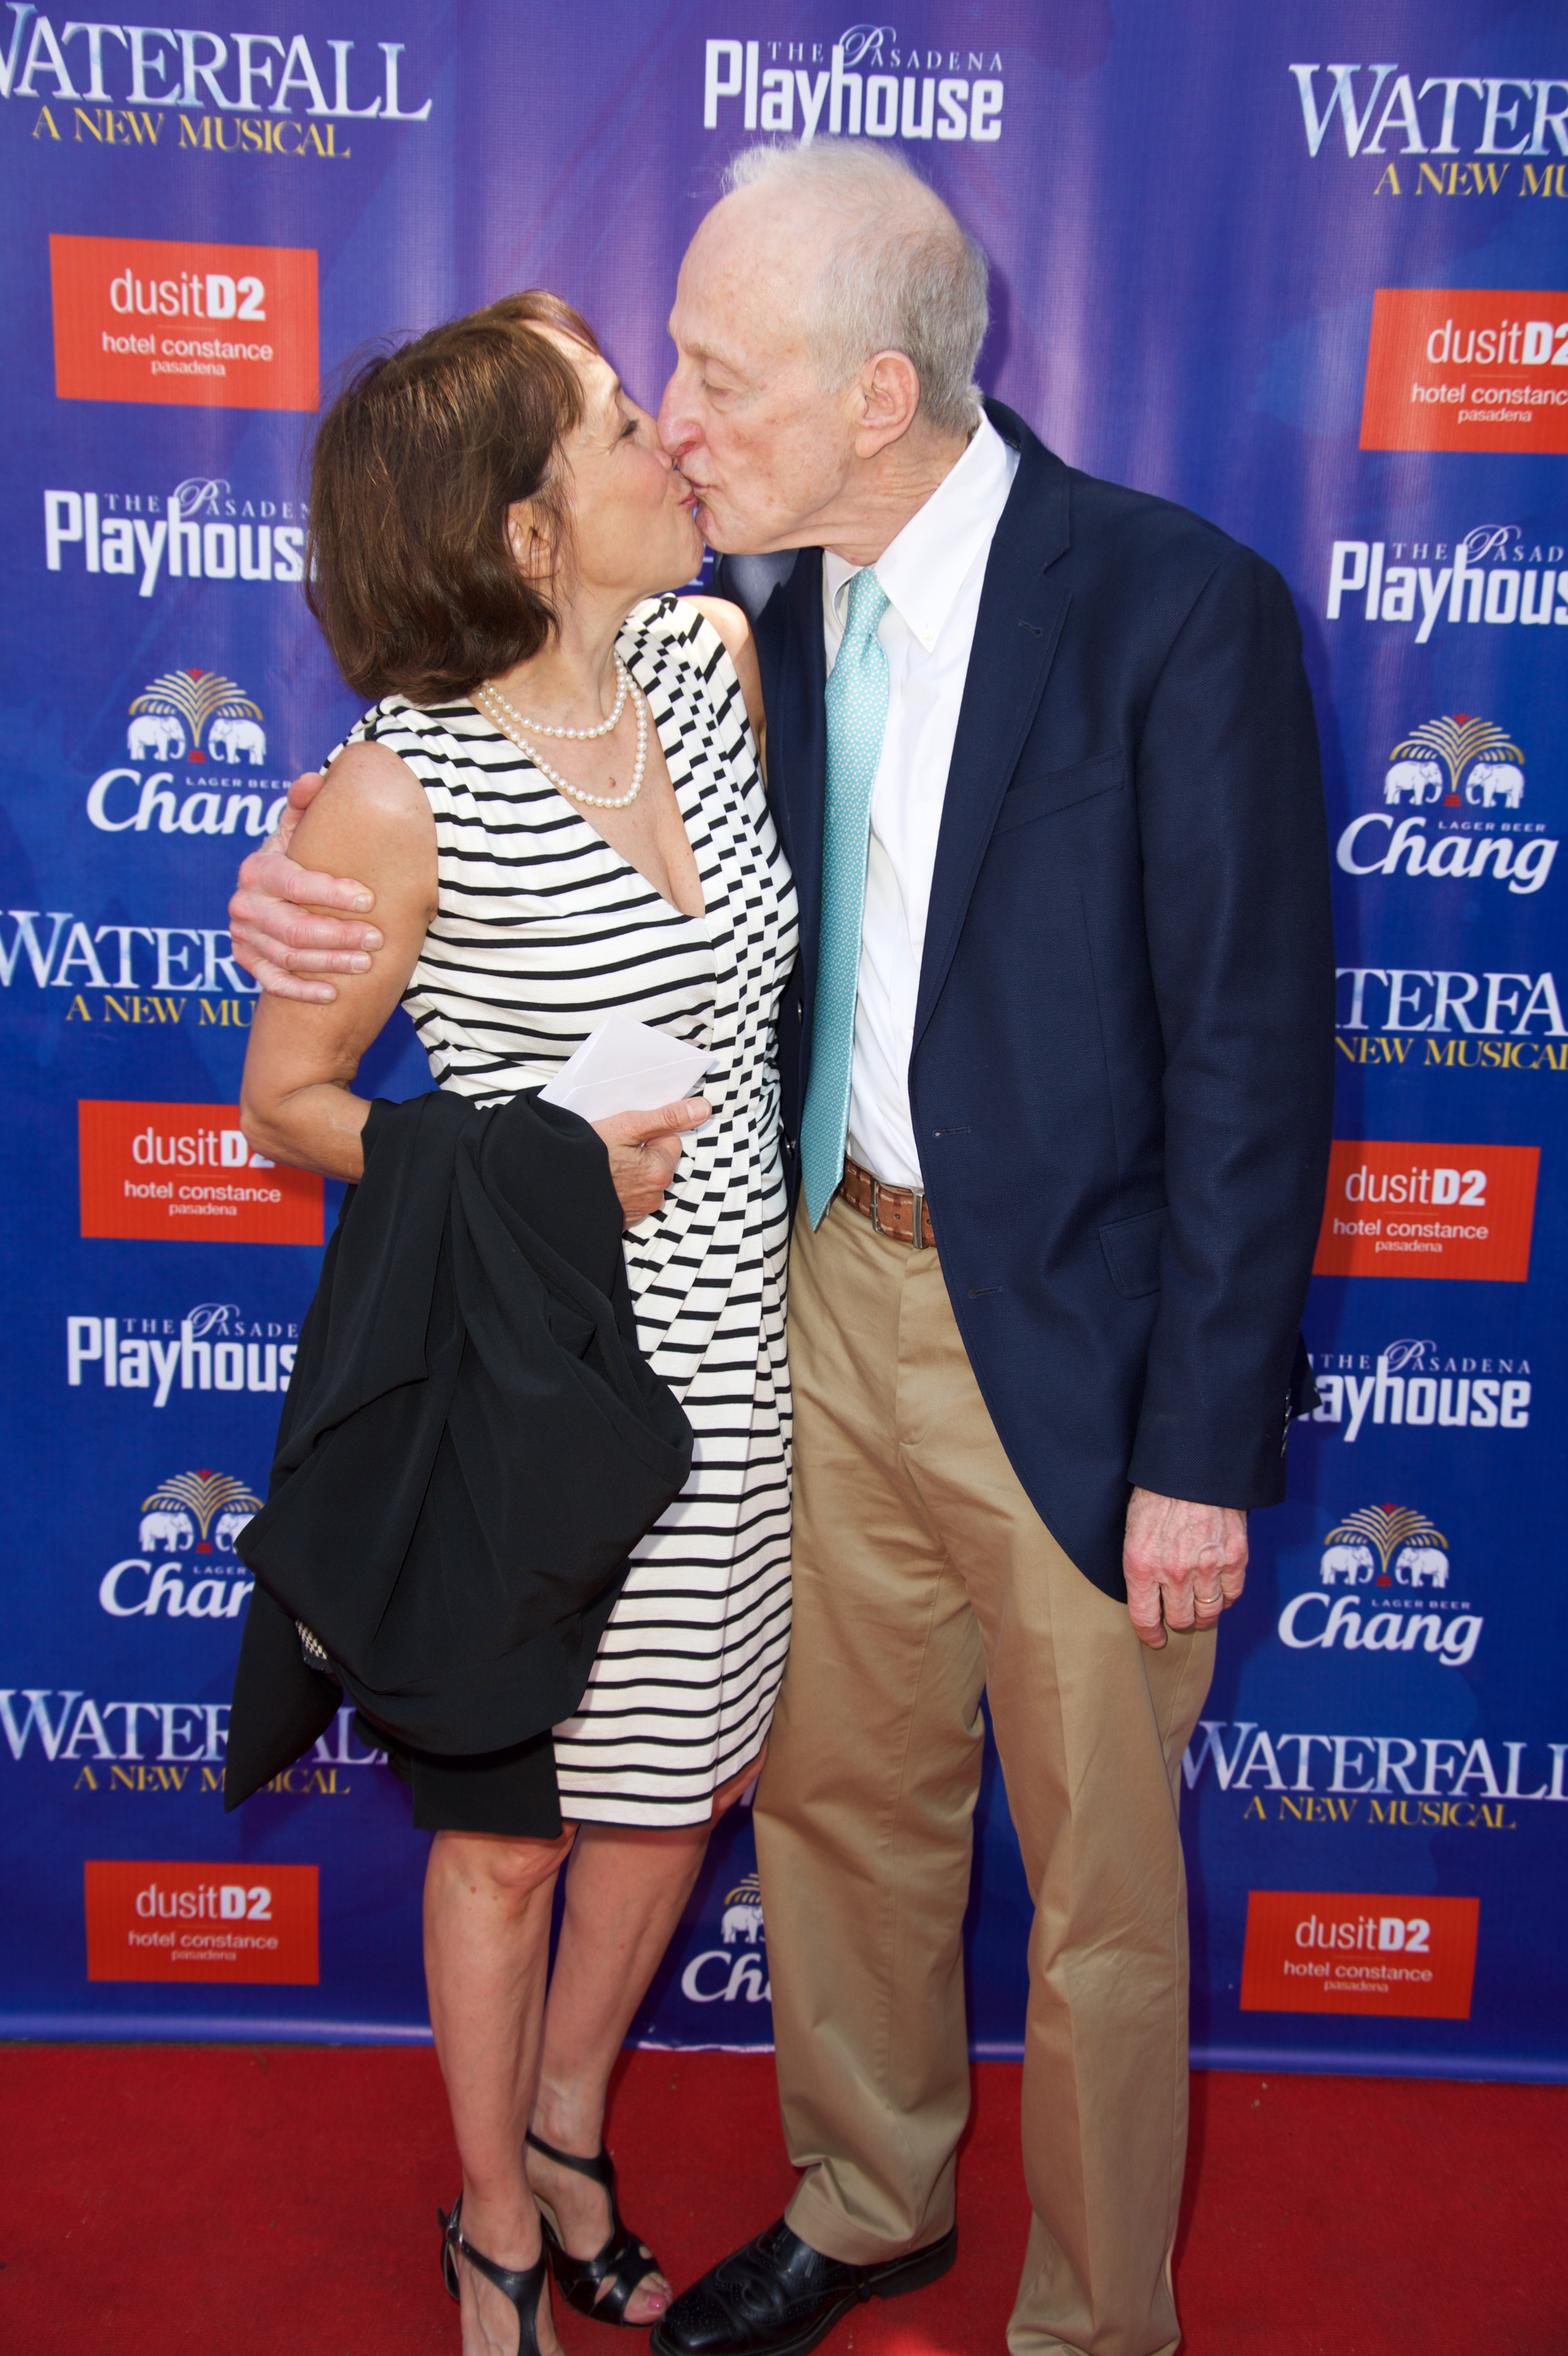 Didi Conn and David Shire attend The Pasadena Playhouse Presents "Waterfall" Opening Night Performance at Pasadena Playhouse on June 7, 2015 in Pasadena, California | Source: Getty Images